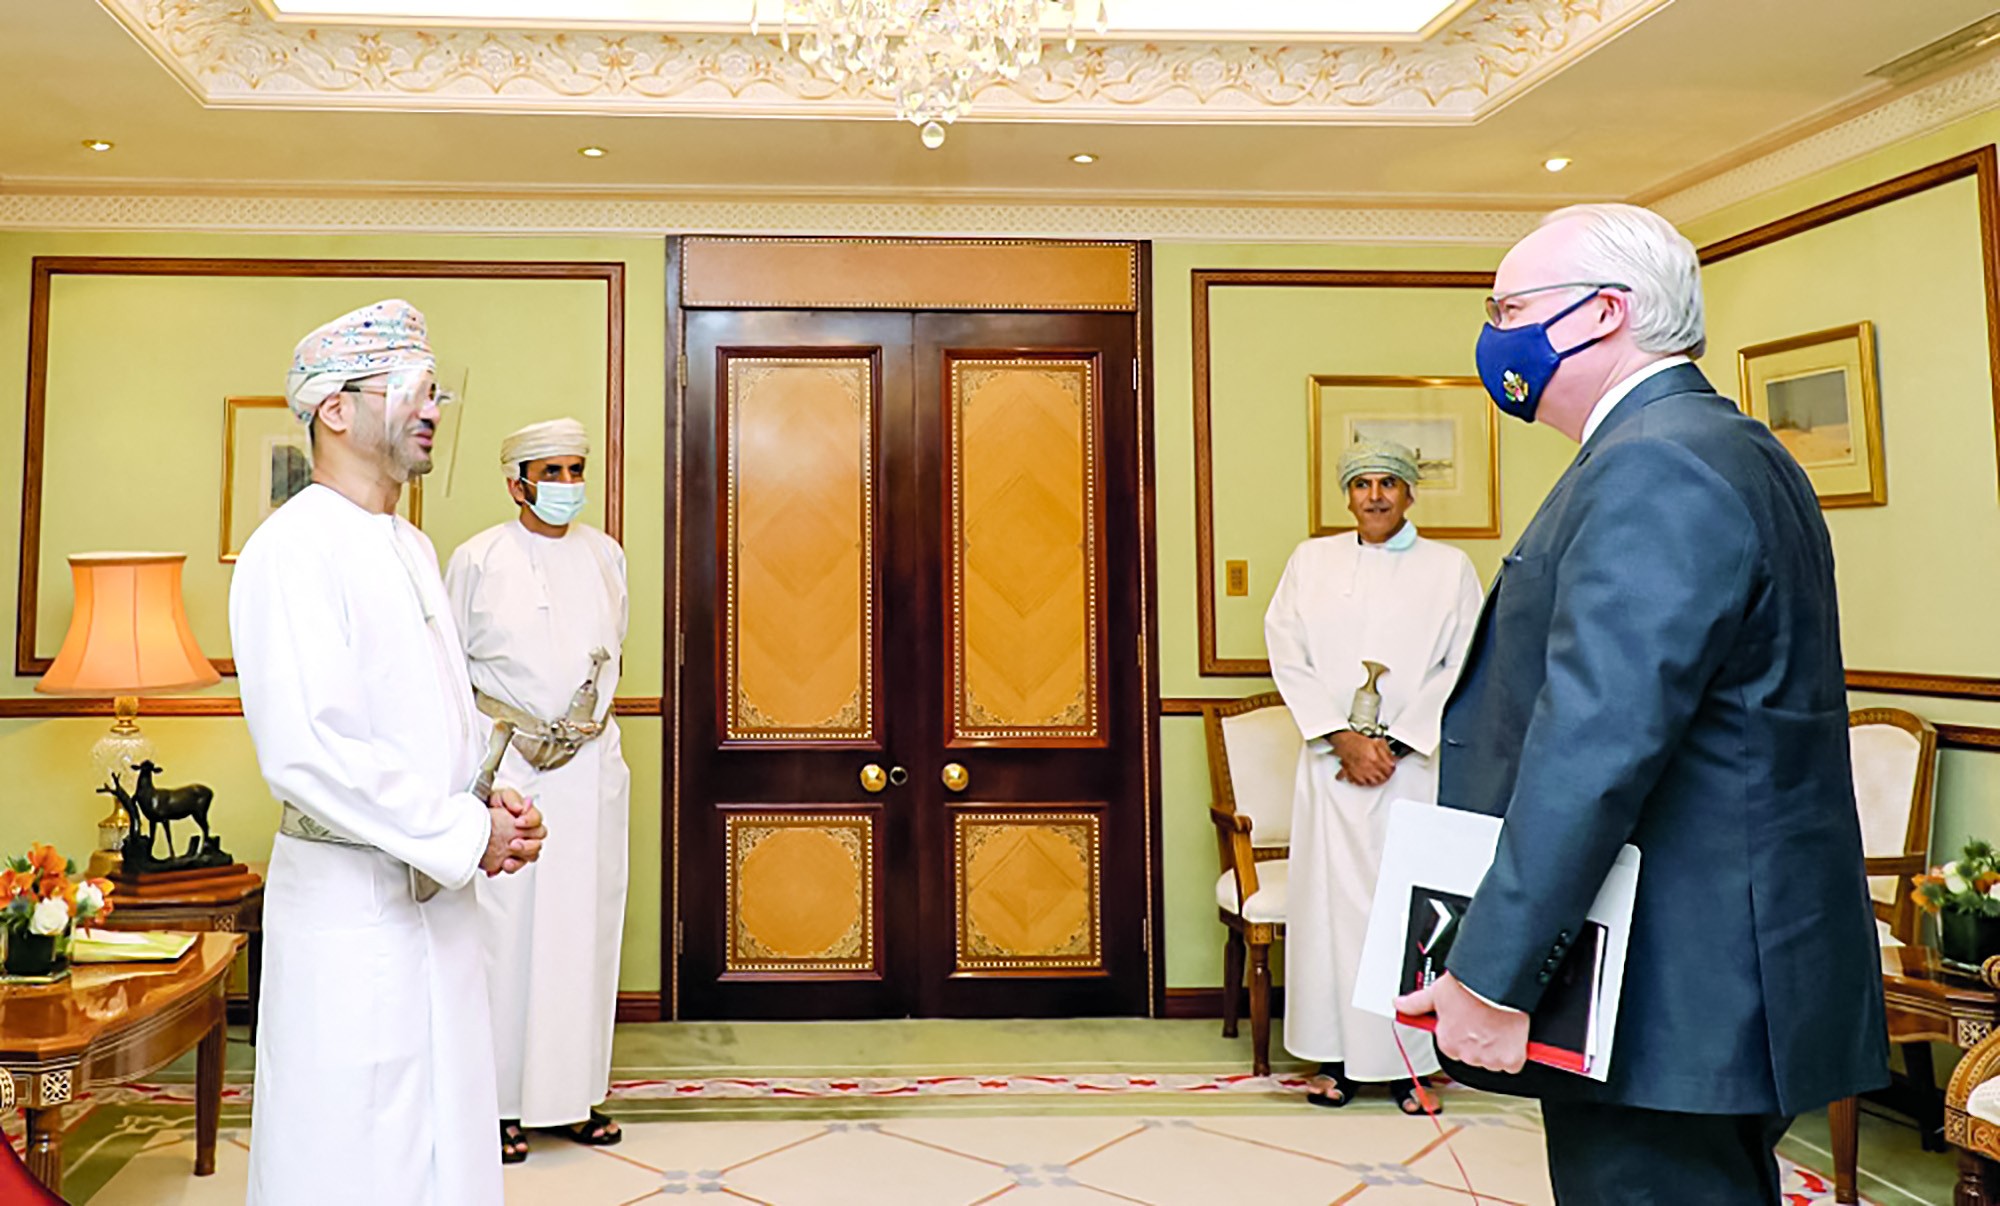 Oman's Foreign Minister Badr bin Hamad bin Hamood al-Busaidi receiving the US Special Envoy for Yemen Tim Lenderking in the capital Muscat (AFP)